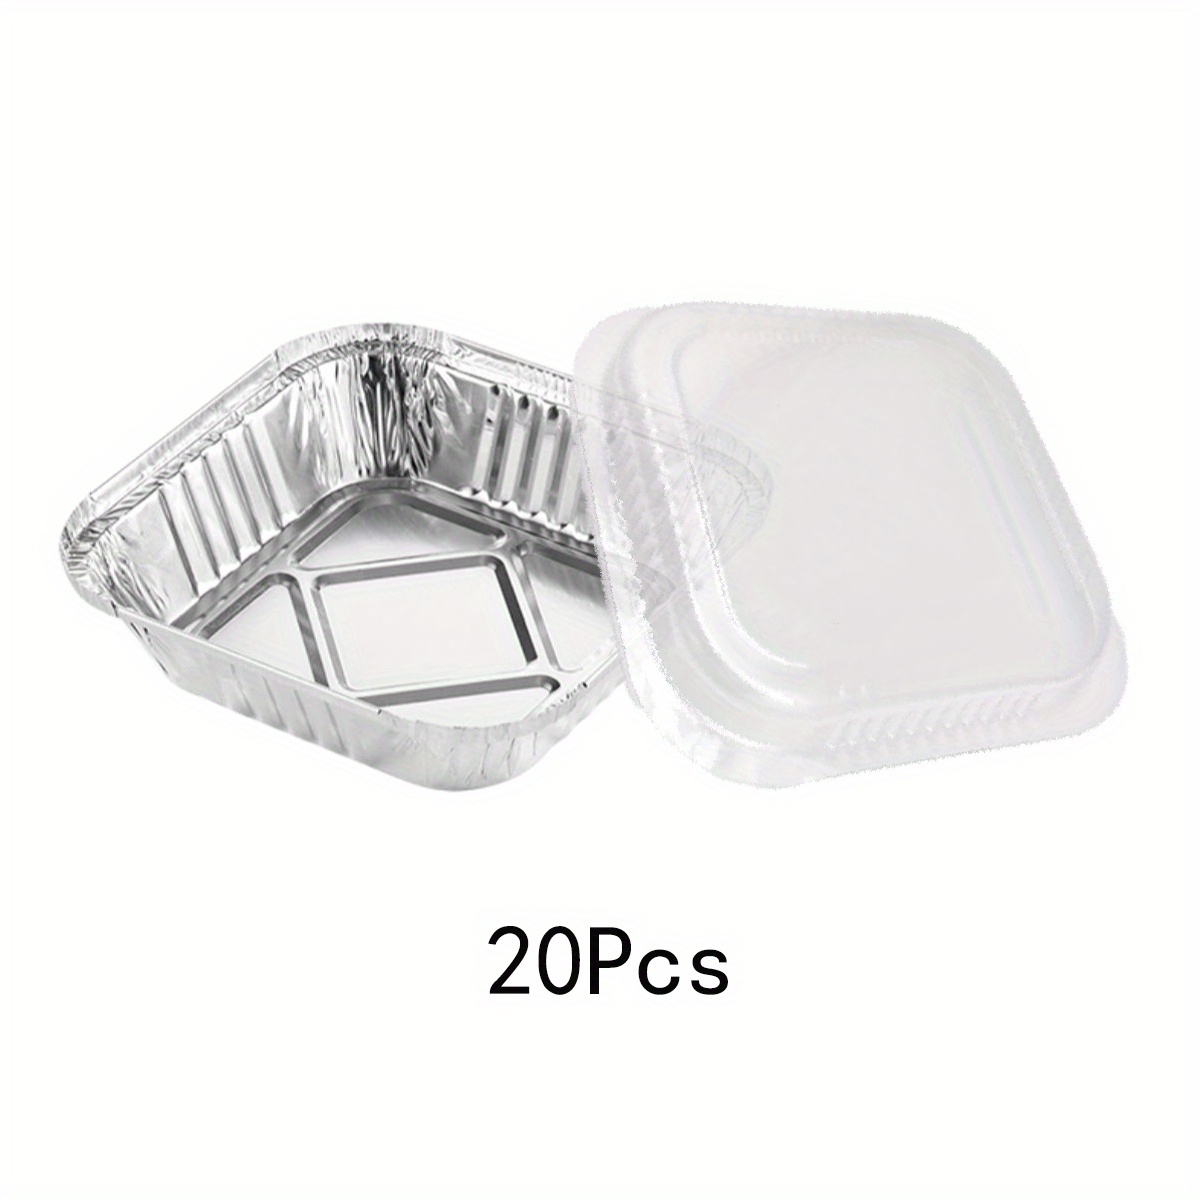 8X8 Foil Pans with Lids (20 Pack) 8 Inch Square Aluminum Pans with Covers